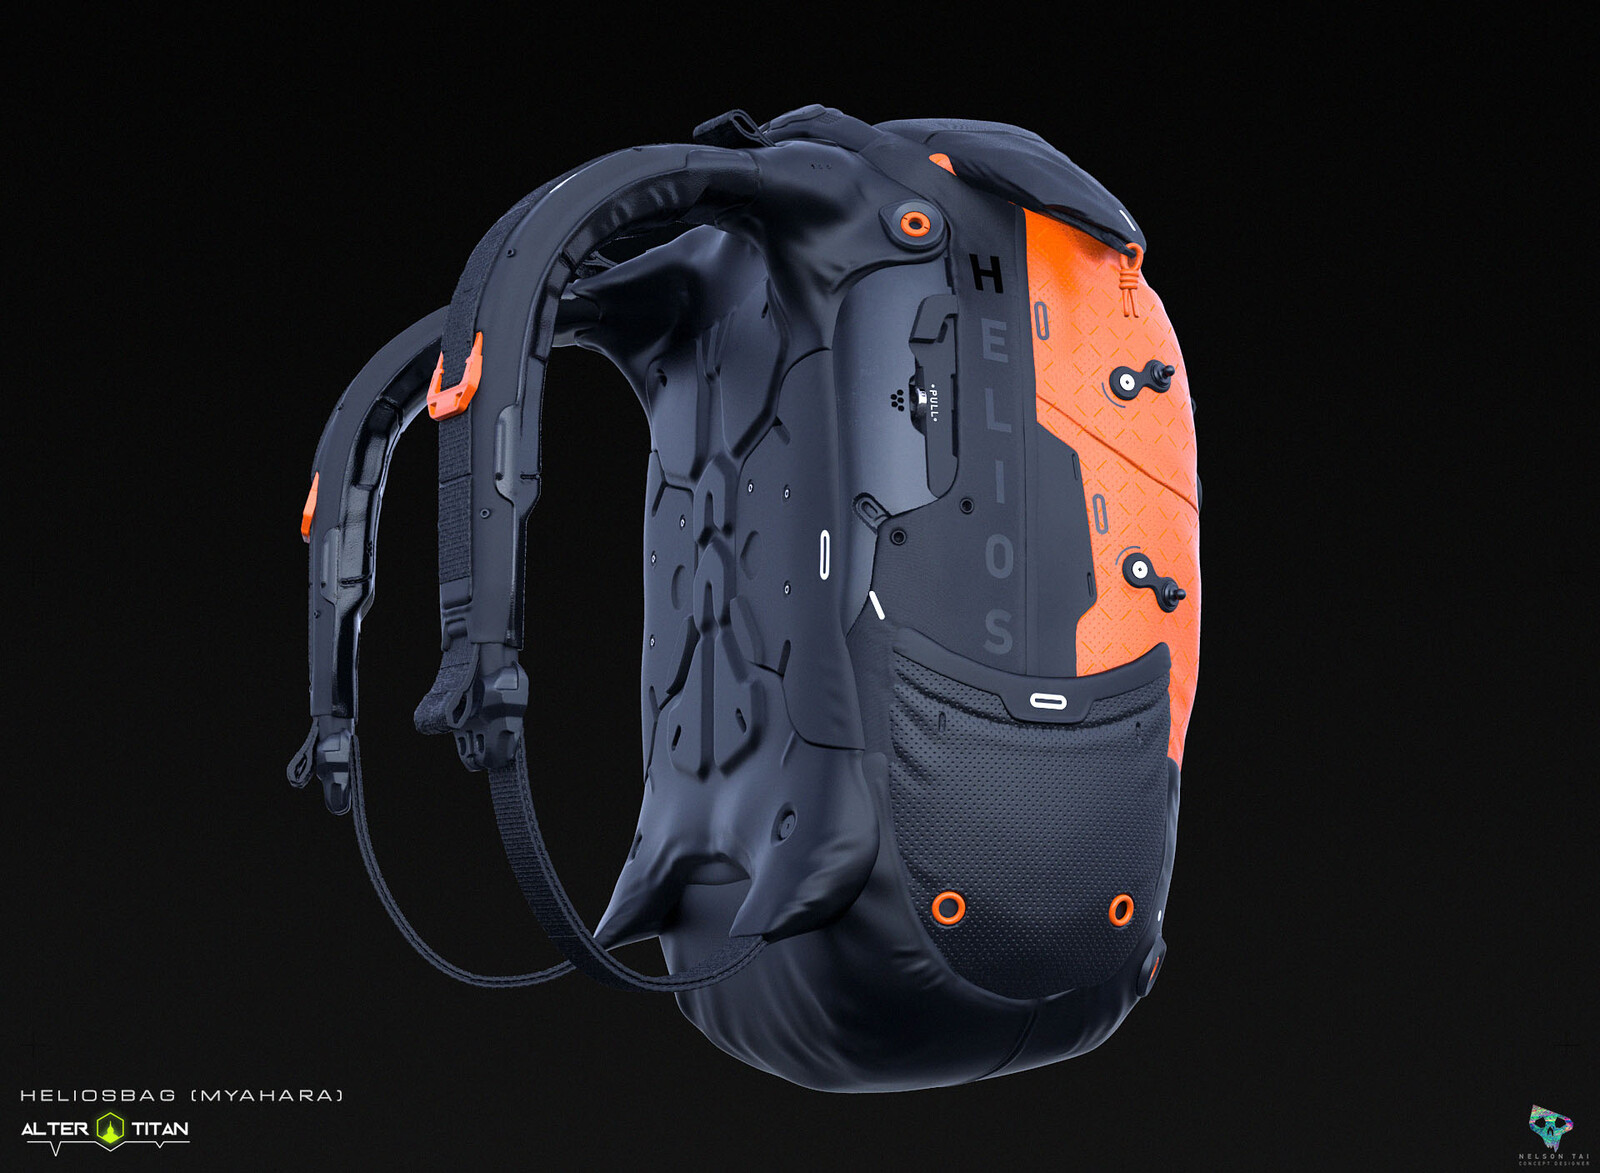 Cool breathable back ensures your Titan's comfort!